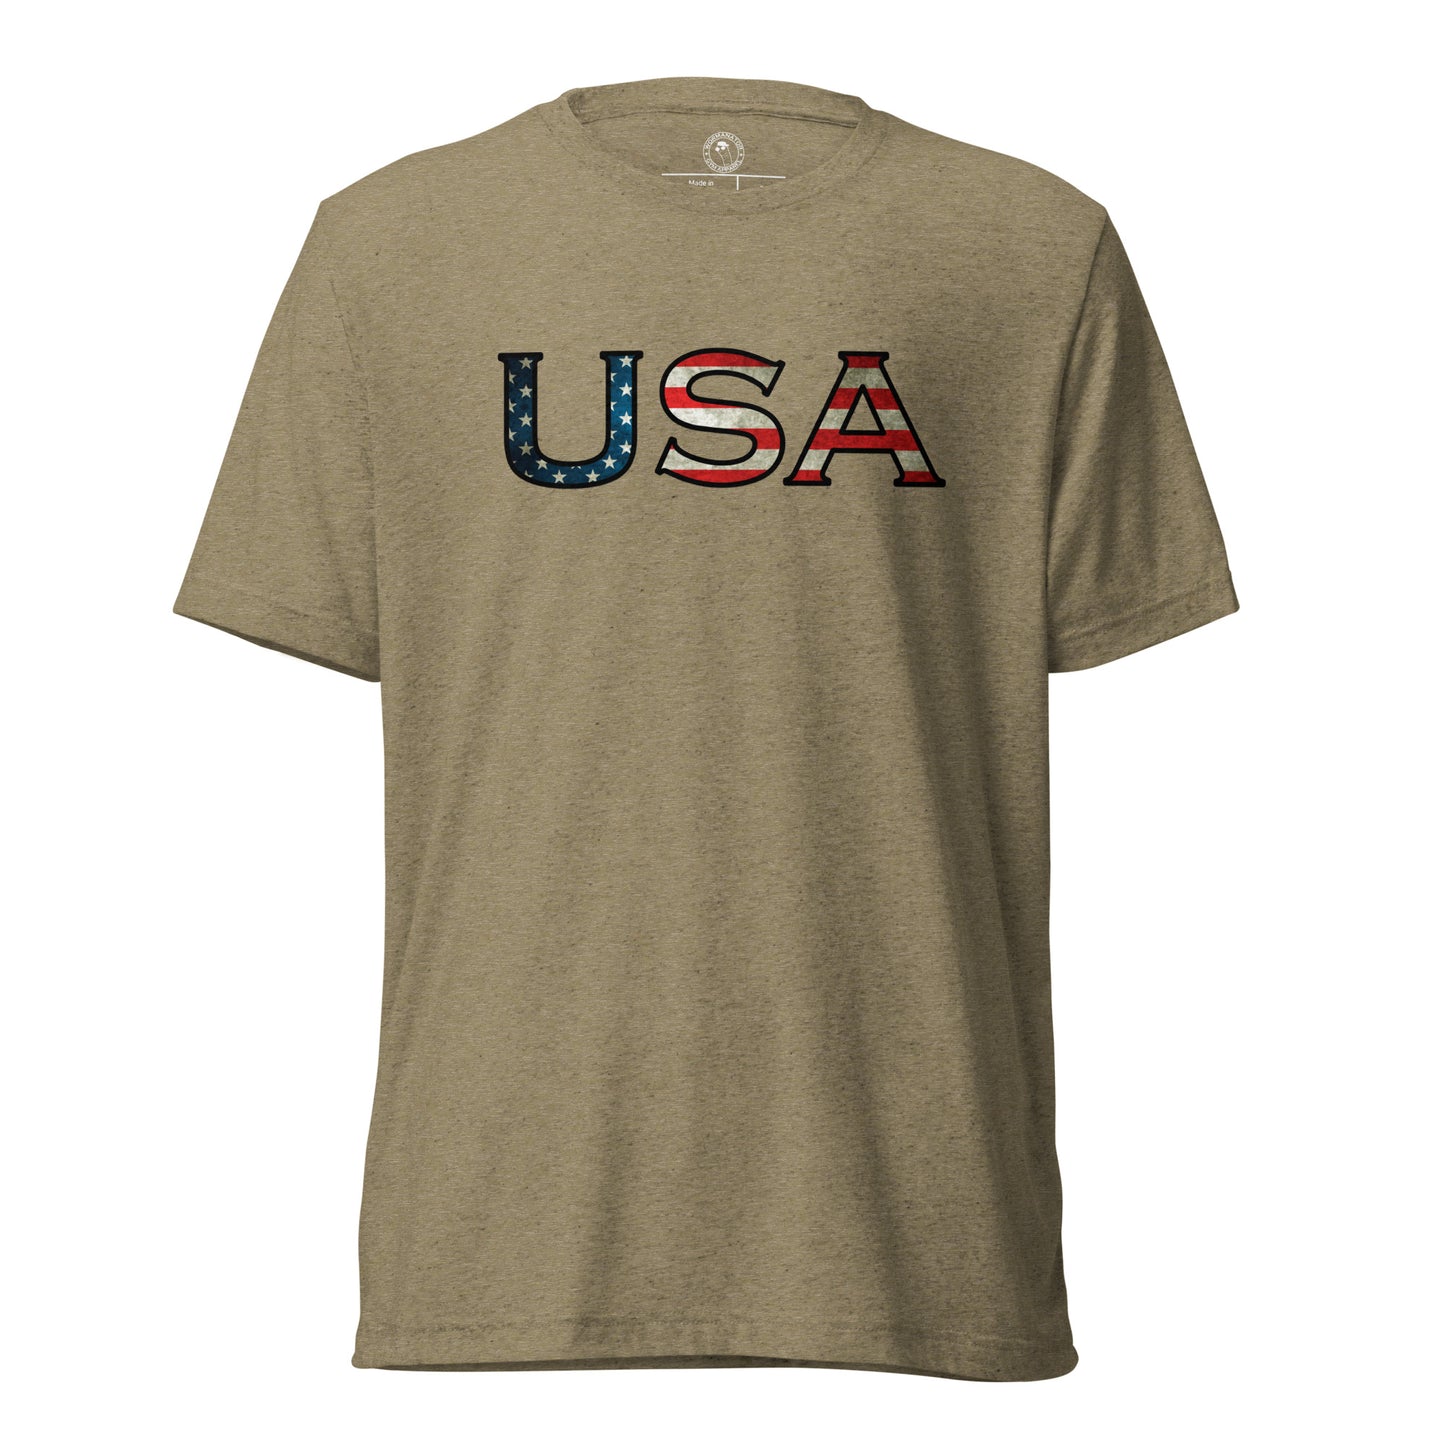 USA T-Shirt in Olive Triblend